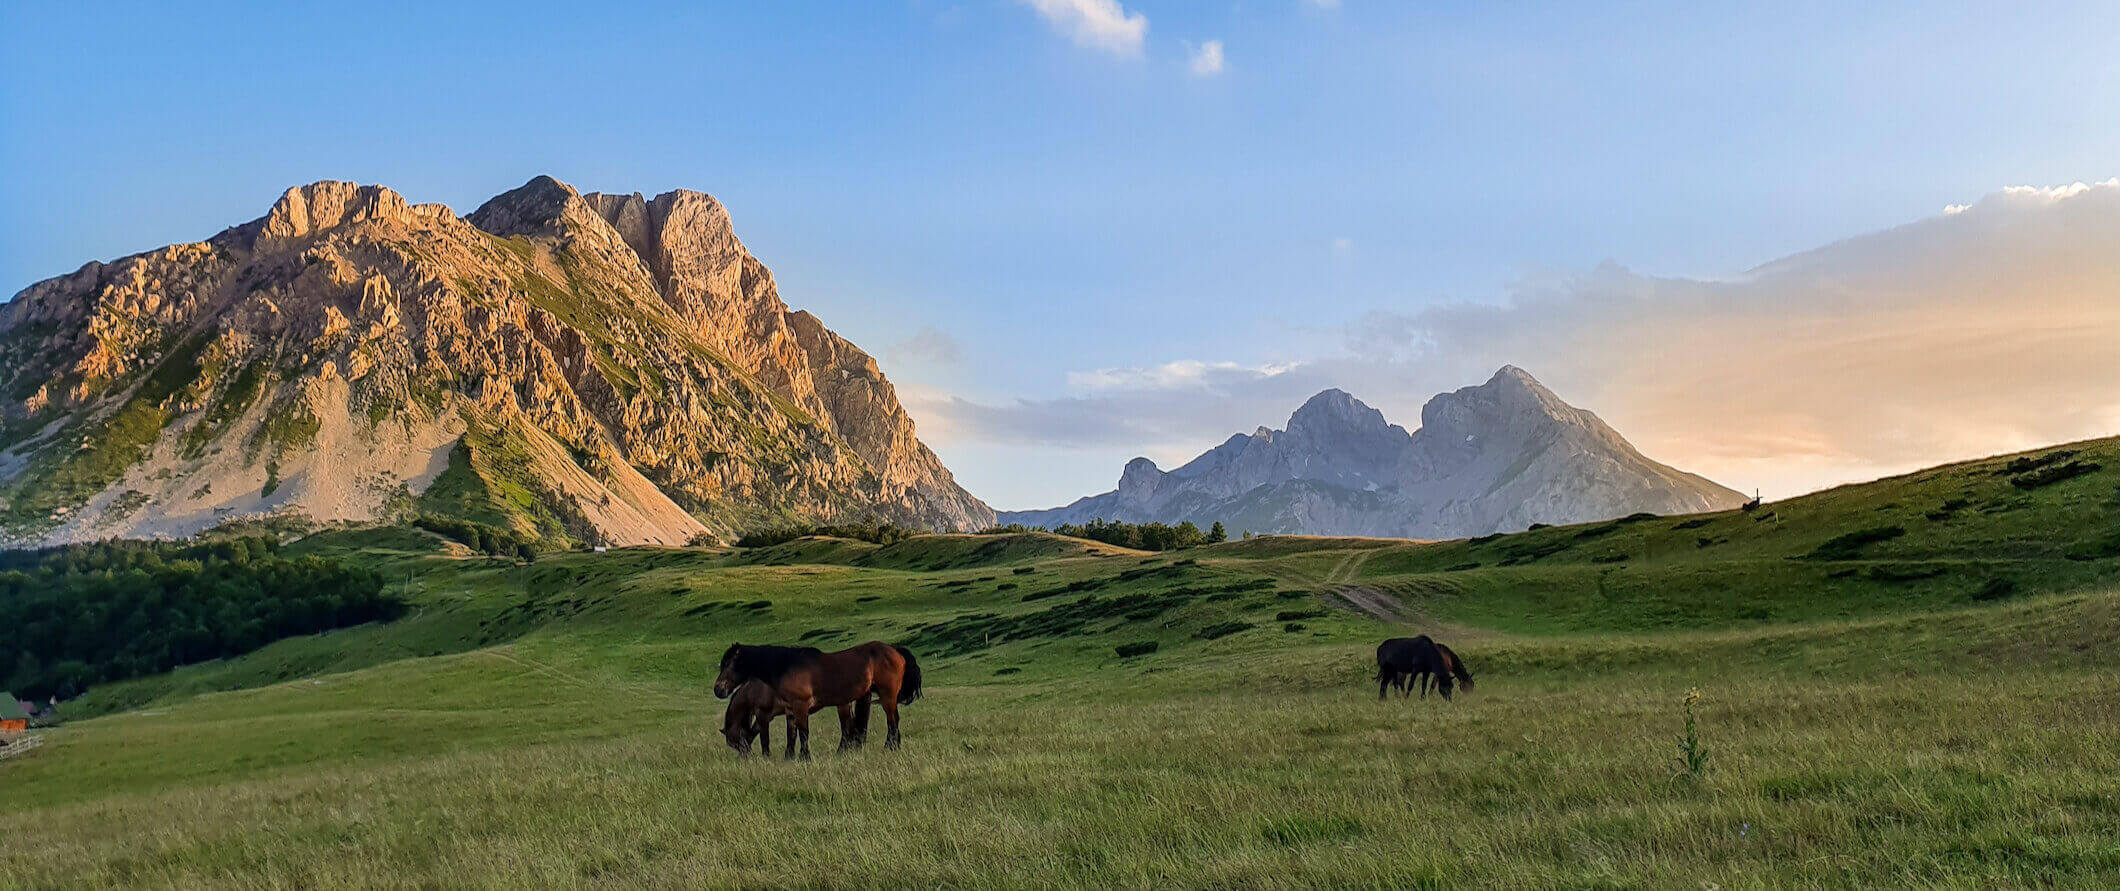 Horses in a sprawling green field near mountains in Montenegro